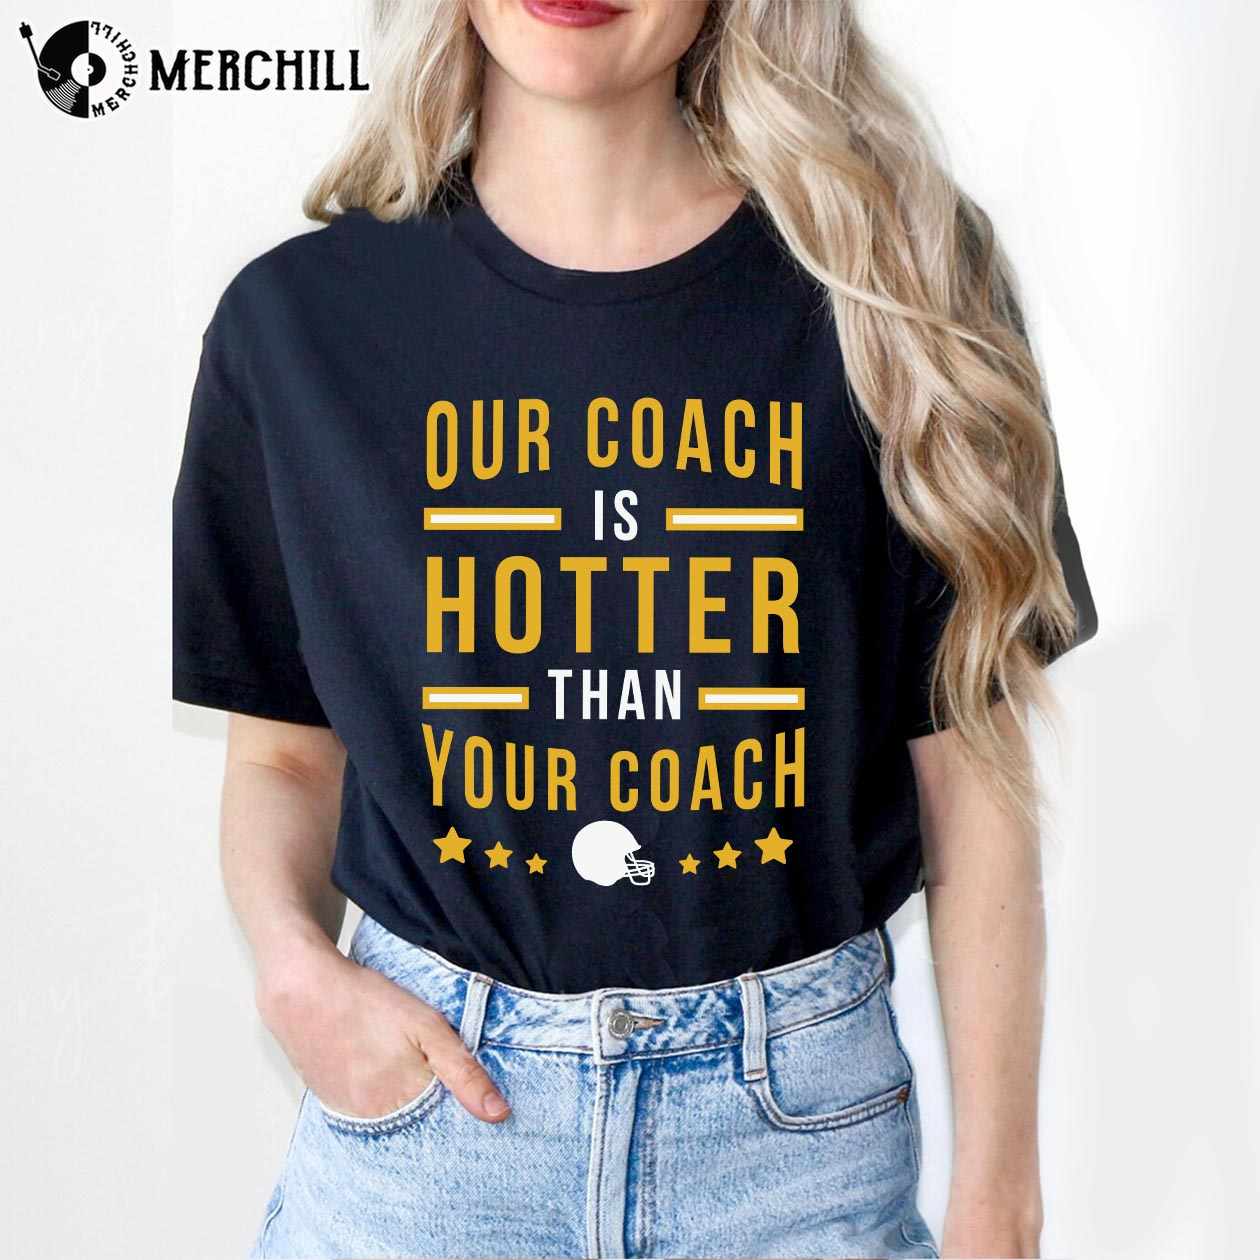 Green Bay Wisconsin Football Shirt Our Coach is Hotter Than Your Coach  Shirt - Happy Place for Music Lovers